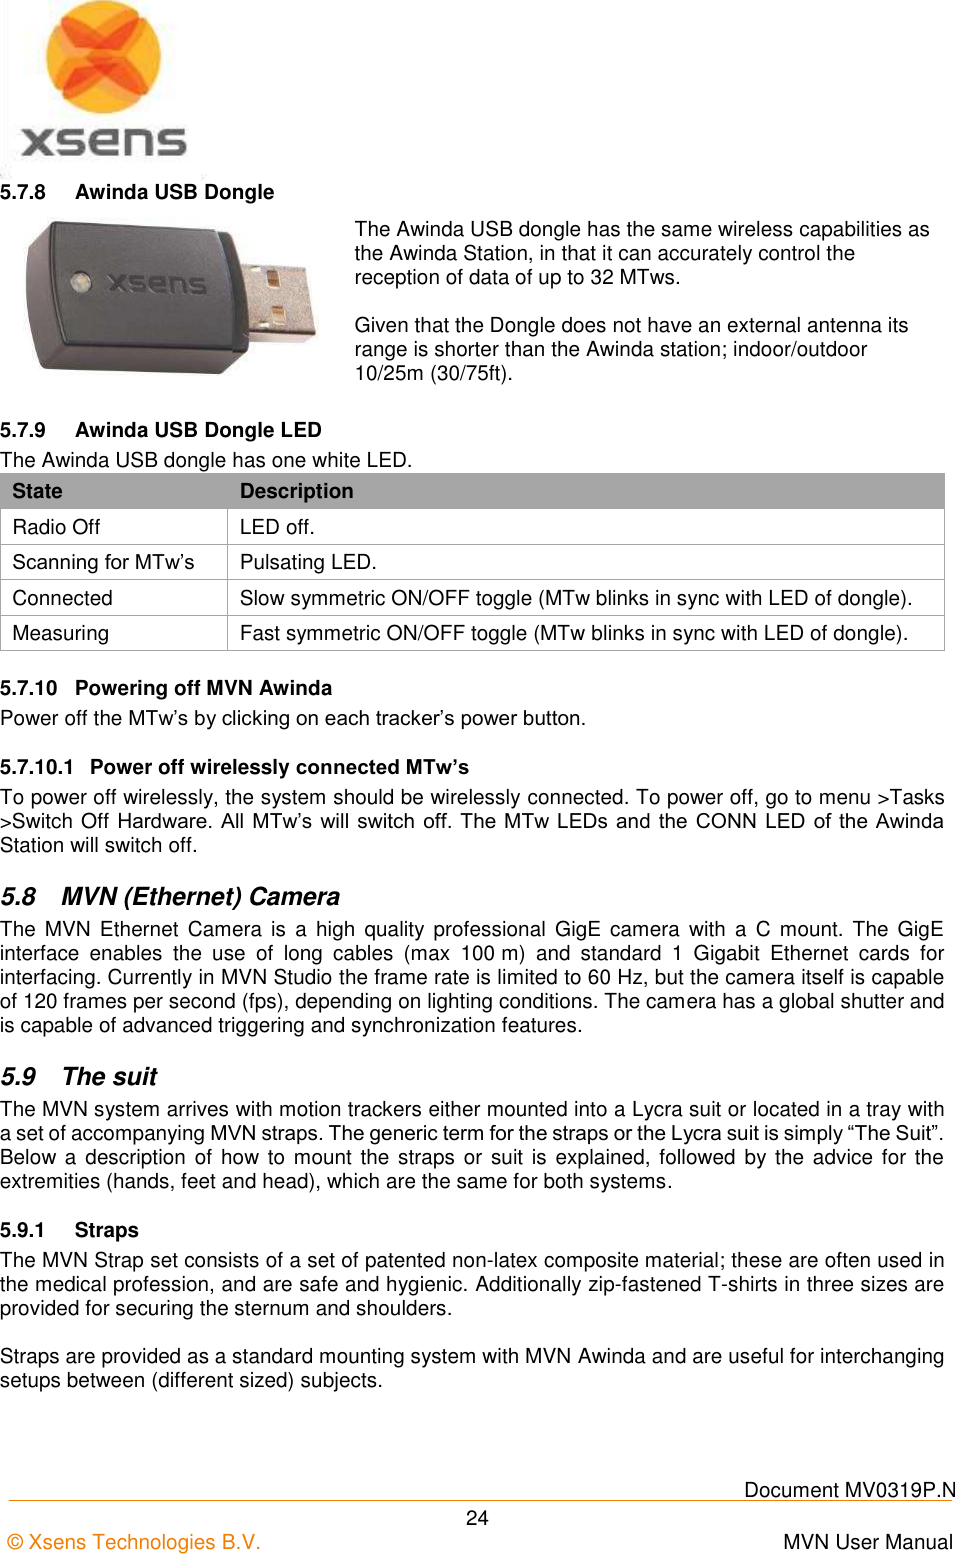    Document MV0319P.N © Xsens Technologies B.V.      MVN User Manual  24 5.7.8  Awinda USB Dongle  The Awinda USB dongle has the same wireless capabilities as the Awinda Station, in that it can accurately control the reception of data of up to 32 MTws.  Given that the Dongle does not have an external antenna its range is shorter than the Awinda station; indoor/outdoor 10/25m (30/75ft). 5.7.9  Awinda USB Dongle LED The Awinda USB dongle has one white LED. State Description Radio Off LED off. Scanning for MTw’s Pulsating LED. Connected Slow symmetric ON/OFF toggle (MTw blinks in sync with LED of dongle). Measuring  Fast symmetric ON/OFF toggle (MTw blinks in sync with LED of dongle). 5.7.10  Powering off MVN Awinda Power off the MTw’s by clicking on each tracker’s power button. 5.7.10.1  Power off wirelessly connected MTw’s To power off wirelessly, the system should be wirelessly connected. To power off, go to menu &gt;Tasks &gt;Switch Off Hardware. All MTw’s will switch off. The MTw LEDs and the CONN LED of the Awinda Station will switch off. 5.8  MVN (Ethernet) Camera The  MVN  Ethernet  Camera  is a  high quality  professional  GigE  camera  with  a  C  mount.  The GigE interface  enables  the  use  of  long  cables  (max  100 m)  and  standard  1  Gigabit  Ethernet  cards  for interfacing. Currently in MVN Studio the frame rate is limited to 60 Hz, but the camera itself is capable of 120 frames per second (fps), depending on lighting conditions. The camera has a global shutter and is capable of advanced triggering and synchronization features. 5.9  The suit The MVN system arrives with motion trackers either mounted into a Lycra suit or located in a tray with a set of accompanying MVN straps. The generic term for the straps or the Lycra suit is simply “The Suit”. Below a  description of how to  mount the straps  or suit is  explained, followed by the  advice  for  the extremities (hands, feet and head), which are the same for both systems. 5.9.1  Straps The MVN Strap set consists of a set of patented non-latex composite material; these are often used in the medical profession, and are safe and hygienic. Additionally zip-fastened T-shirts in three sizes are provided for securing the sternum and shoulders.  Straps are provided as a standard mounting system with MVN Awinda and are useful for interchanging setups between (different sized) subjects.  